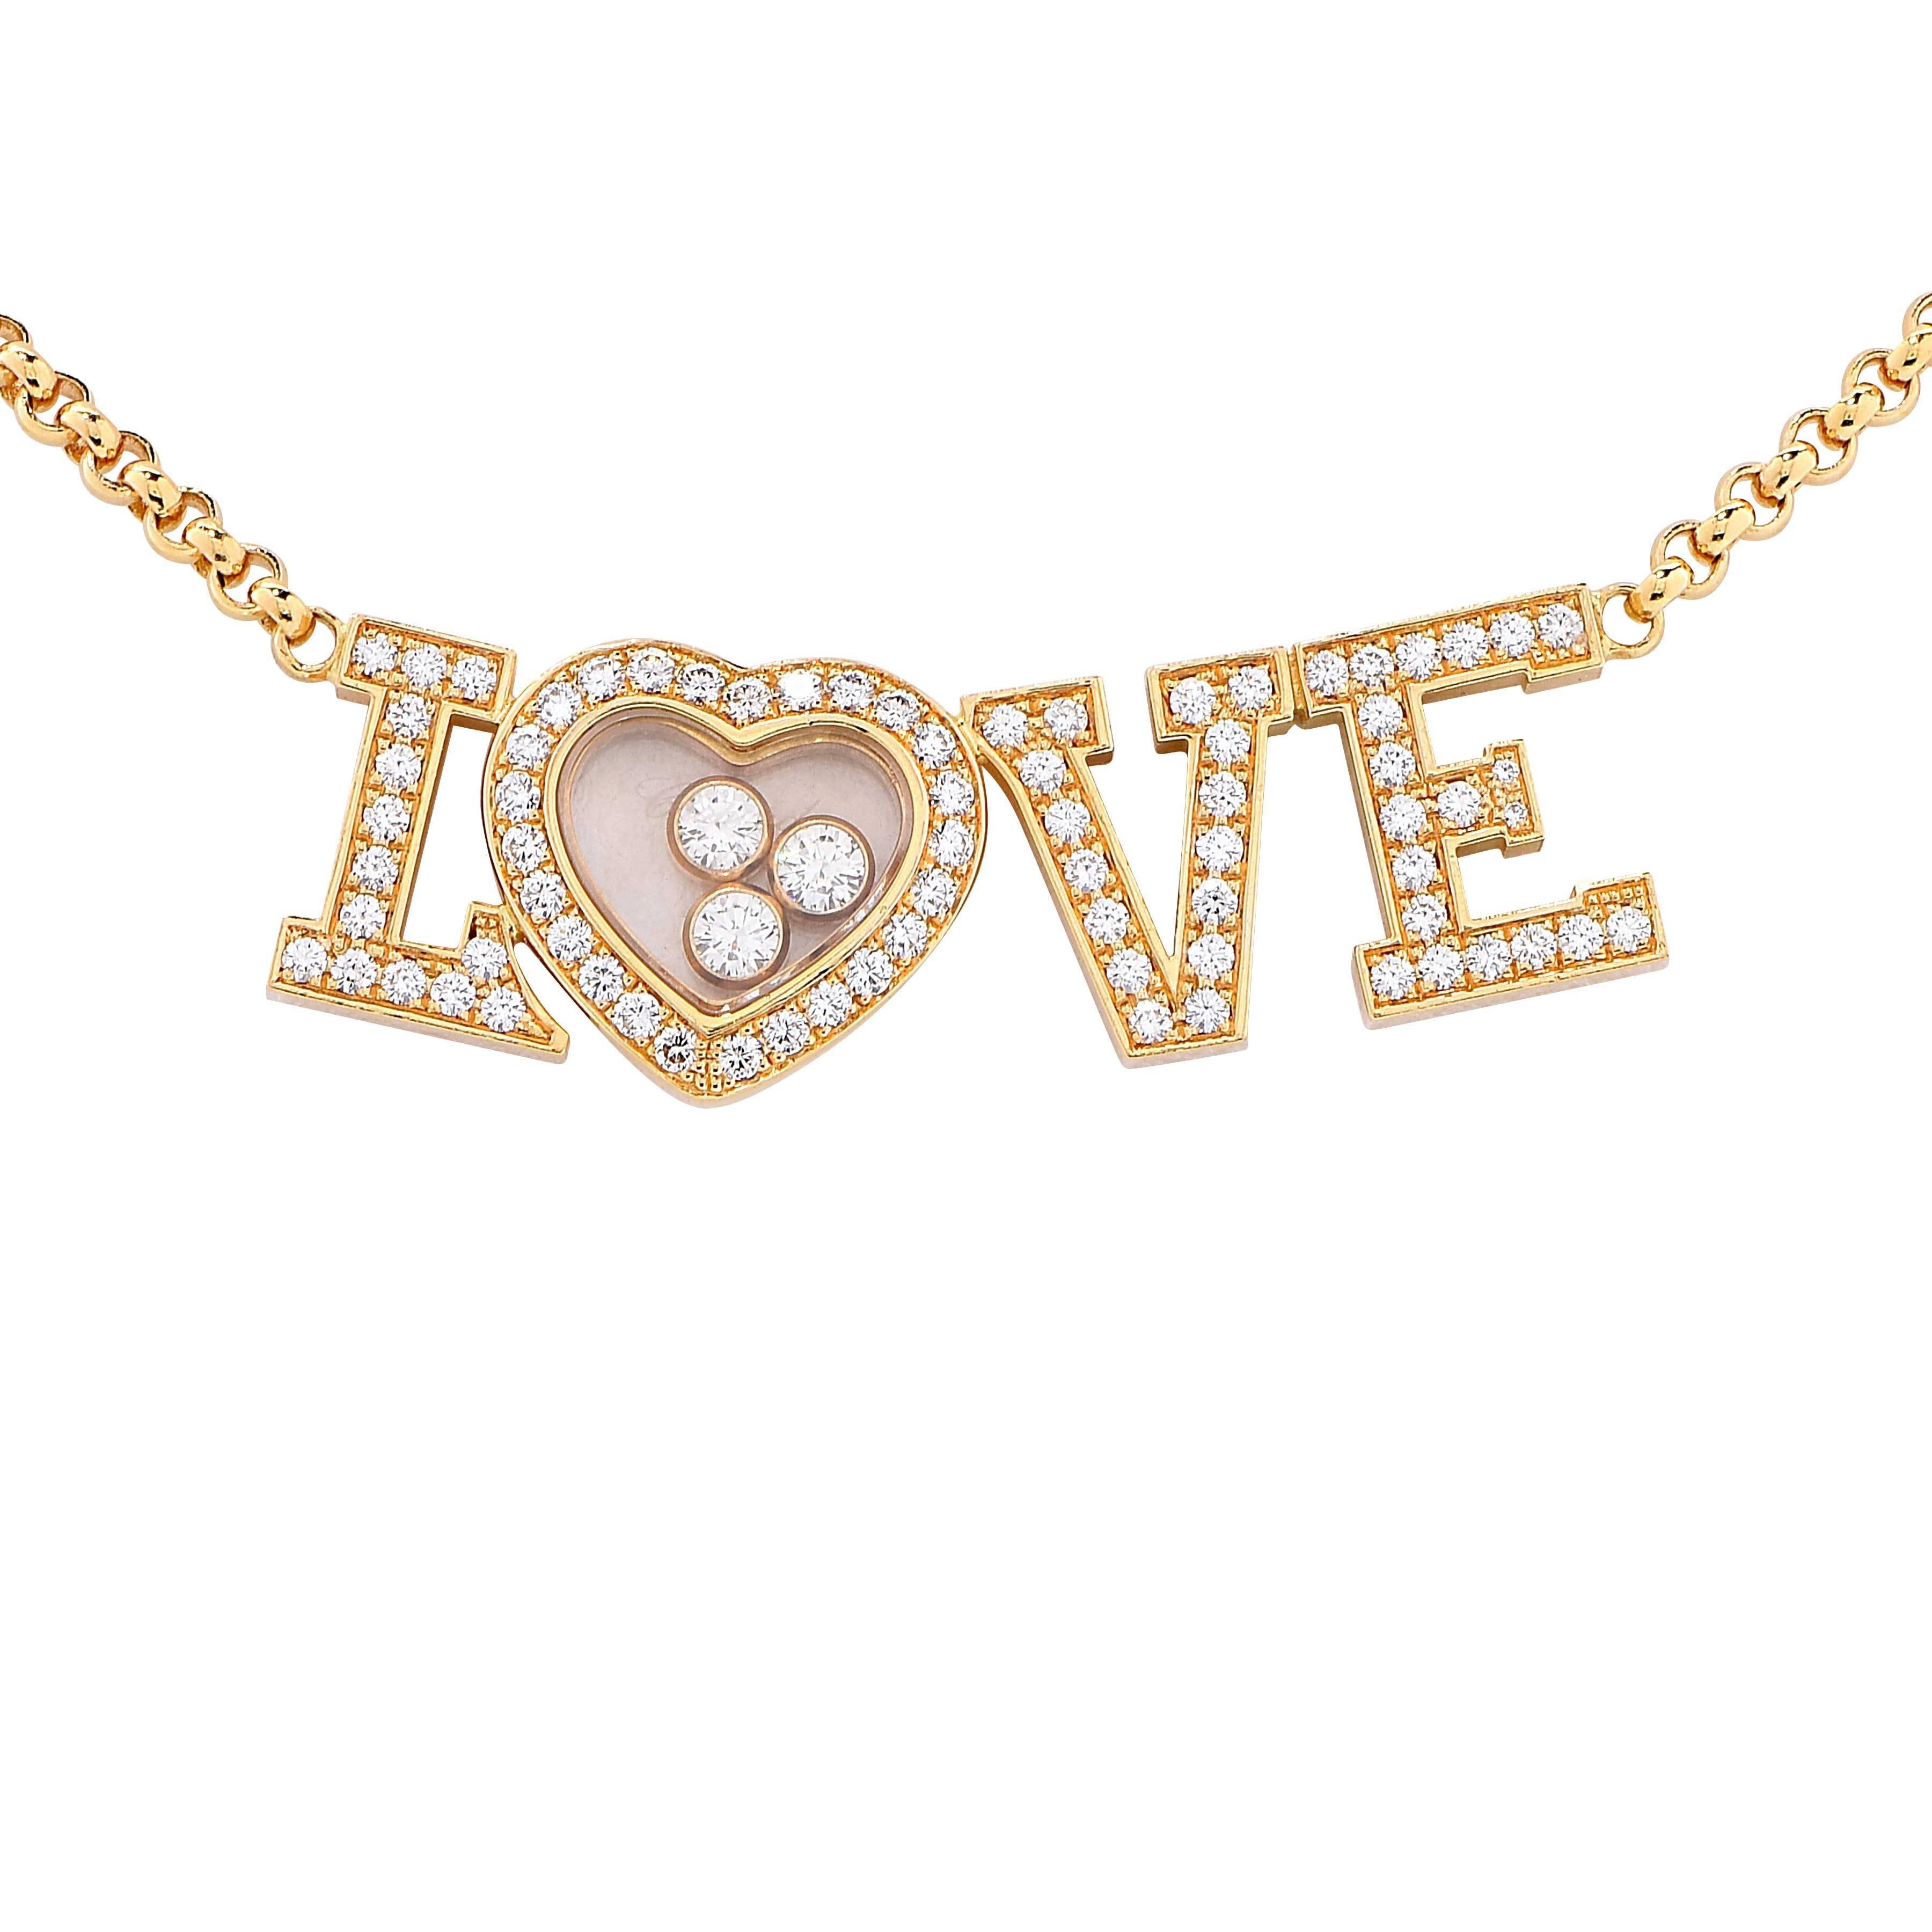 Chopard Happy Diamonds LOVE necklace with chain in 18 carat yellow gold.
Chopard Happy Diamonds Collection. The necklace features the word 'LOVE', each letter fully pave set with round brilliant cut diamonds. The letter 'O' is formed of a heart